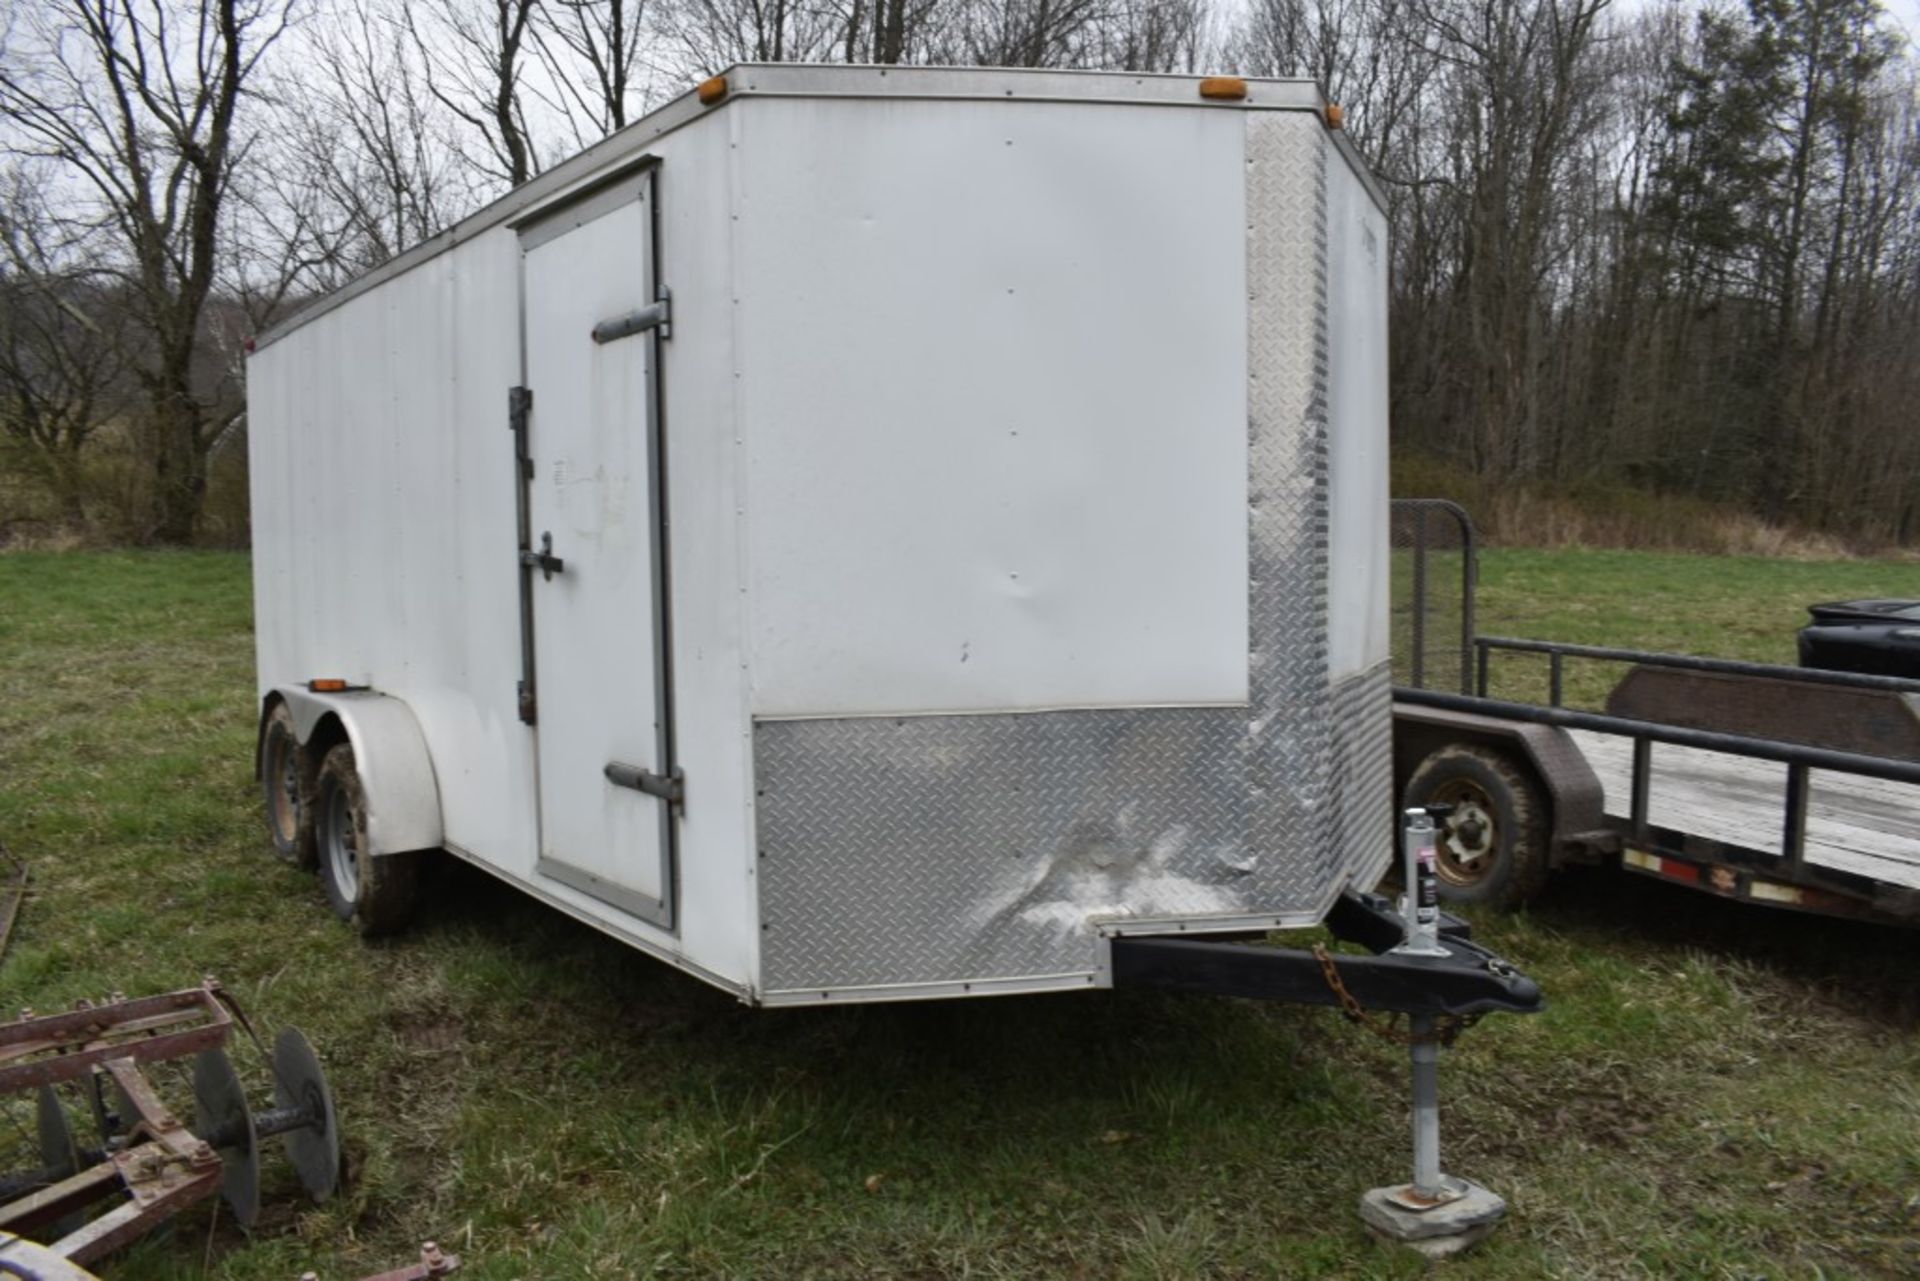 2013 Cynergy Enclosed Trailer - Image 2 of 11